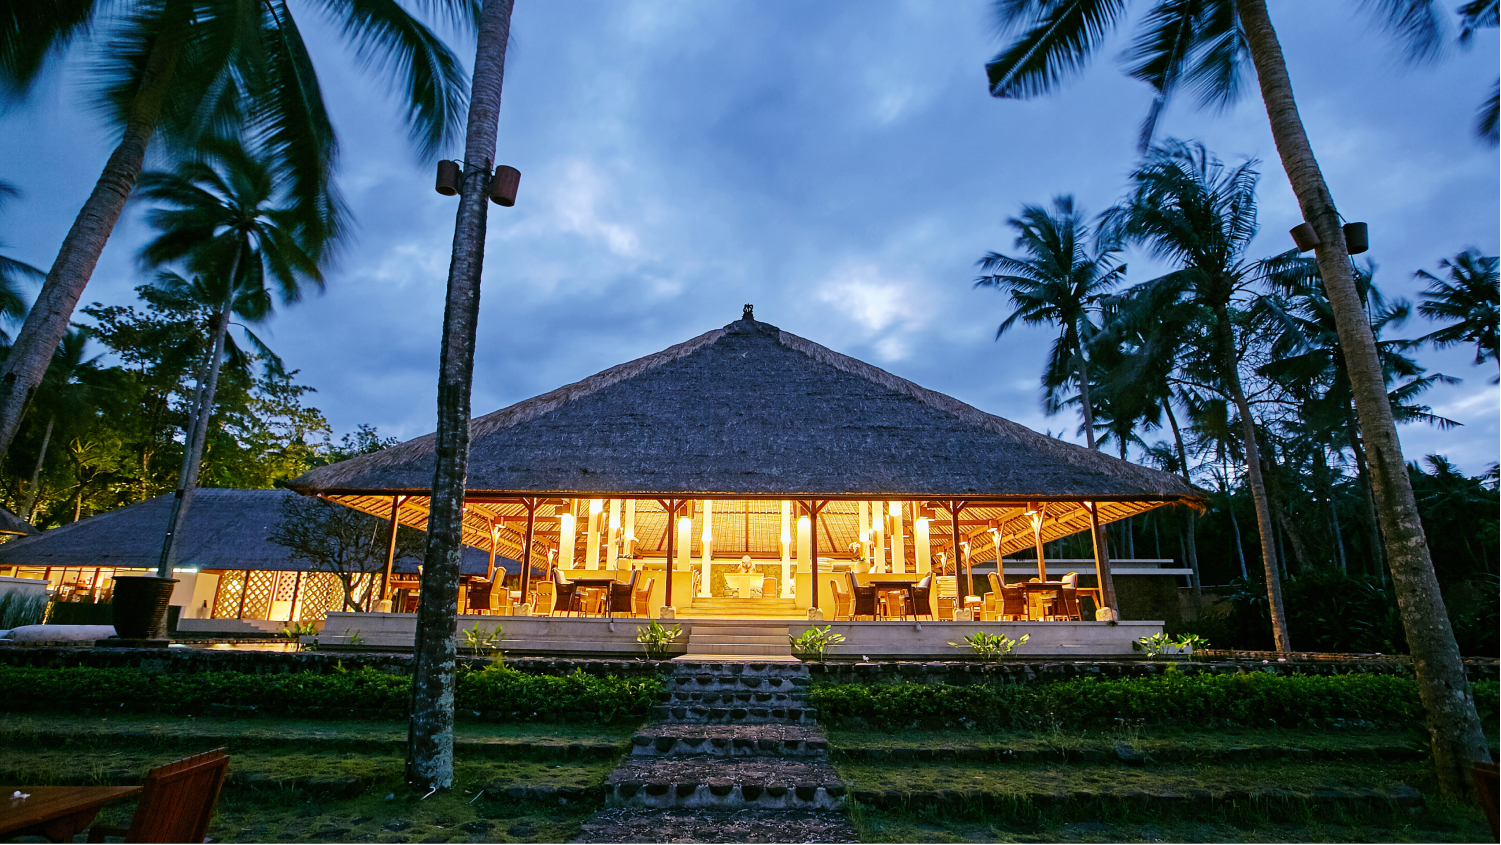 A beautifully lit building with a straw roof surrounded by grass and palm trees